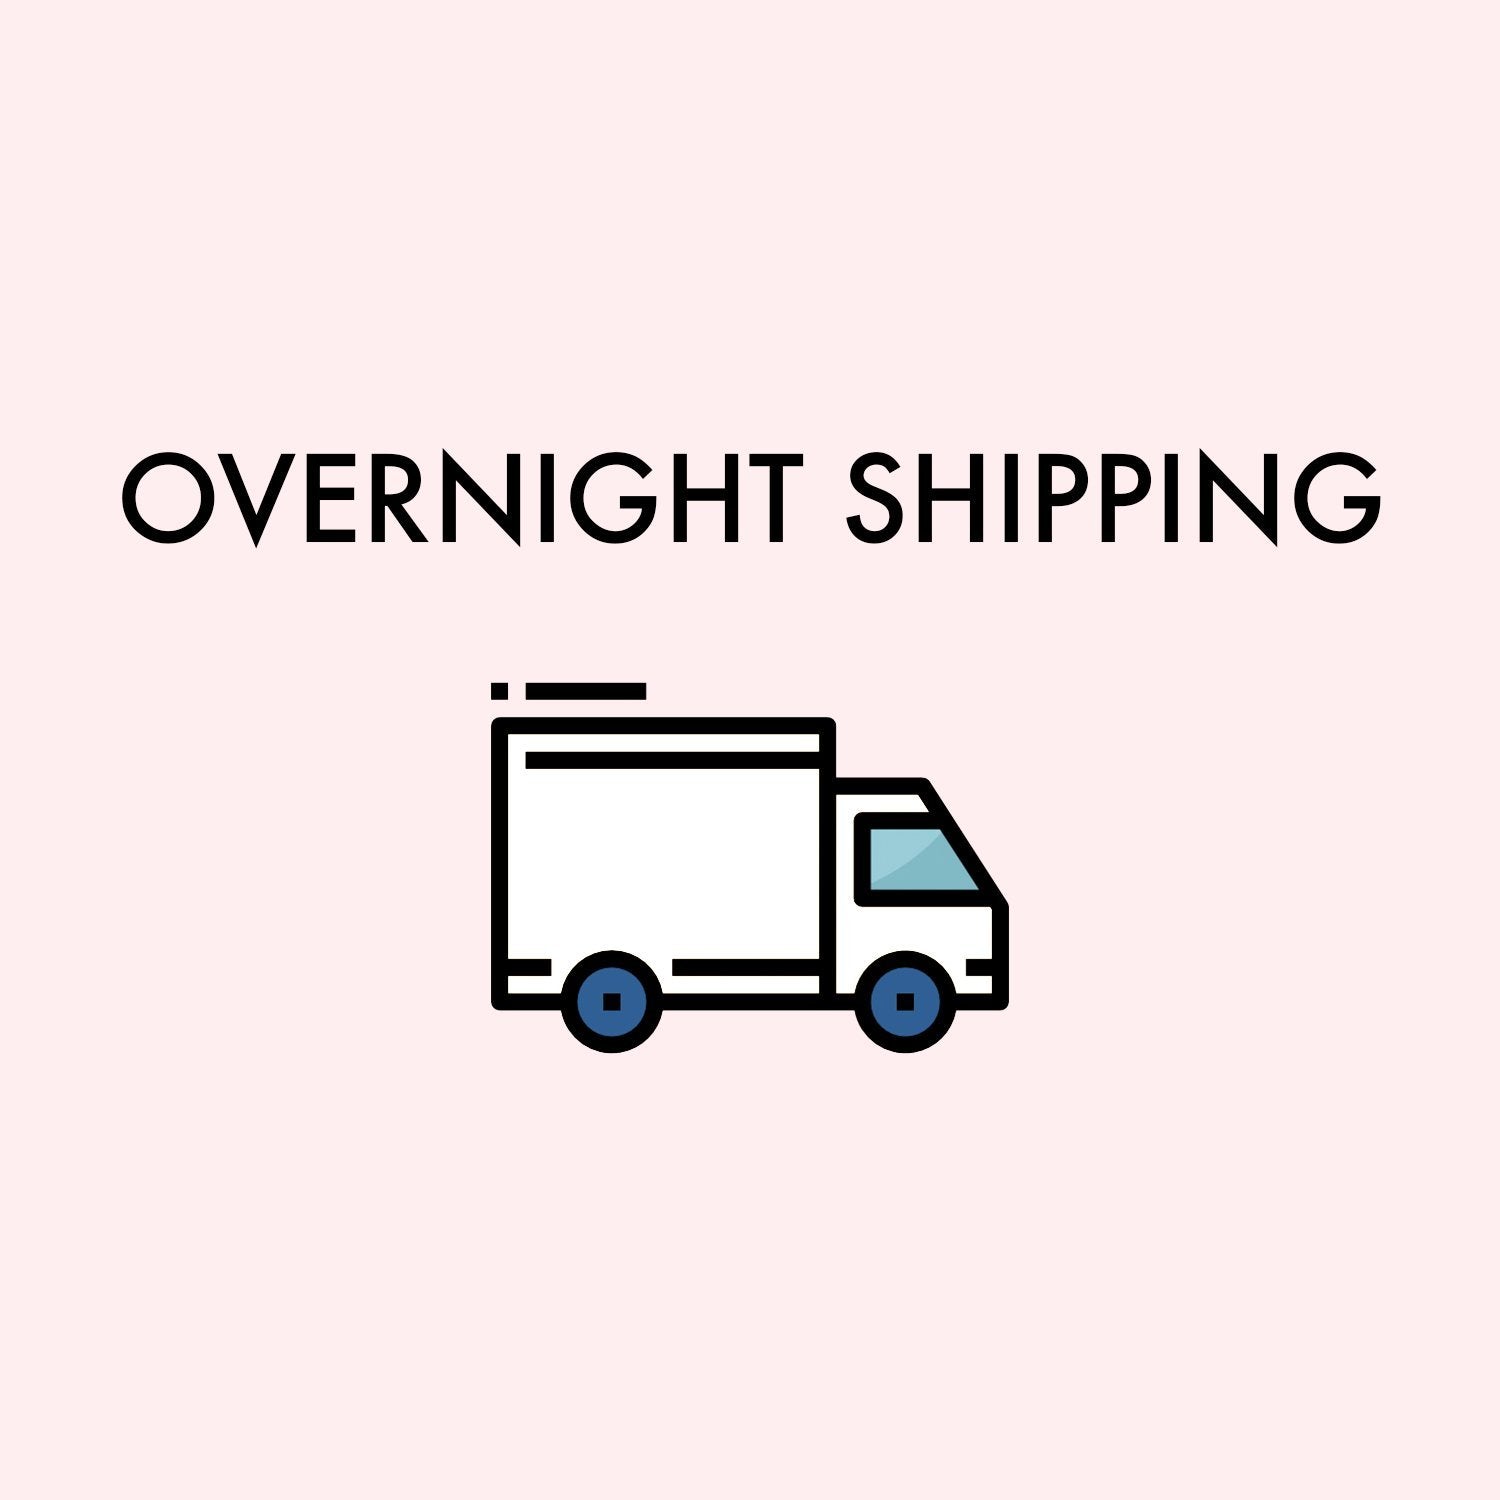 Overnight - Free shipping and delivery icons